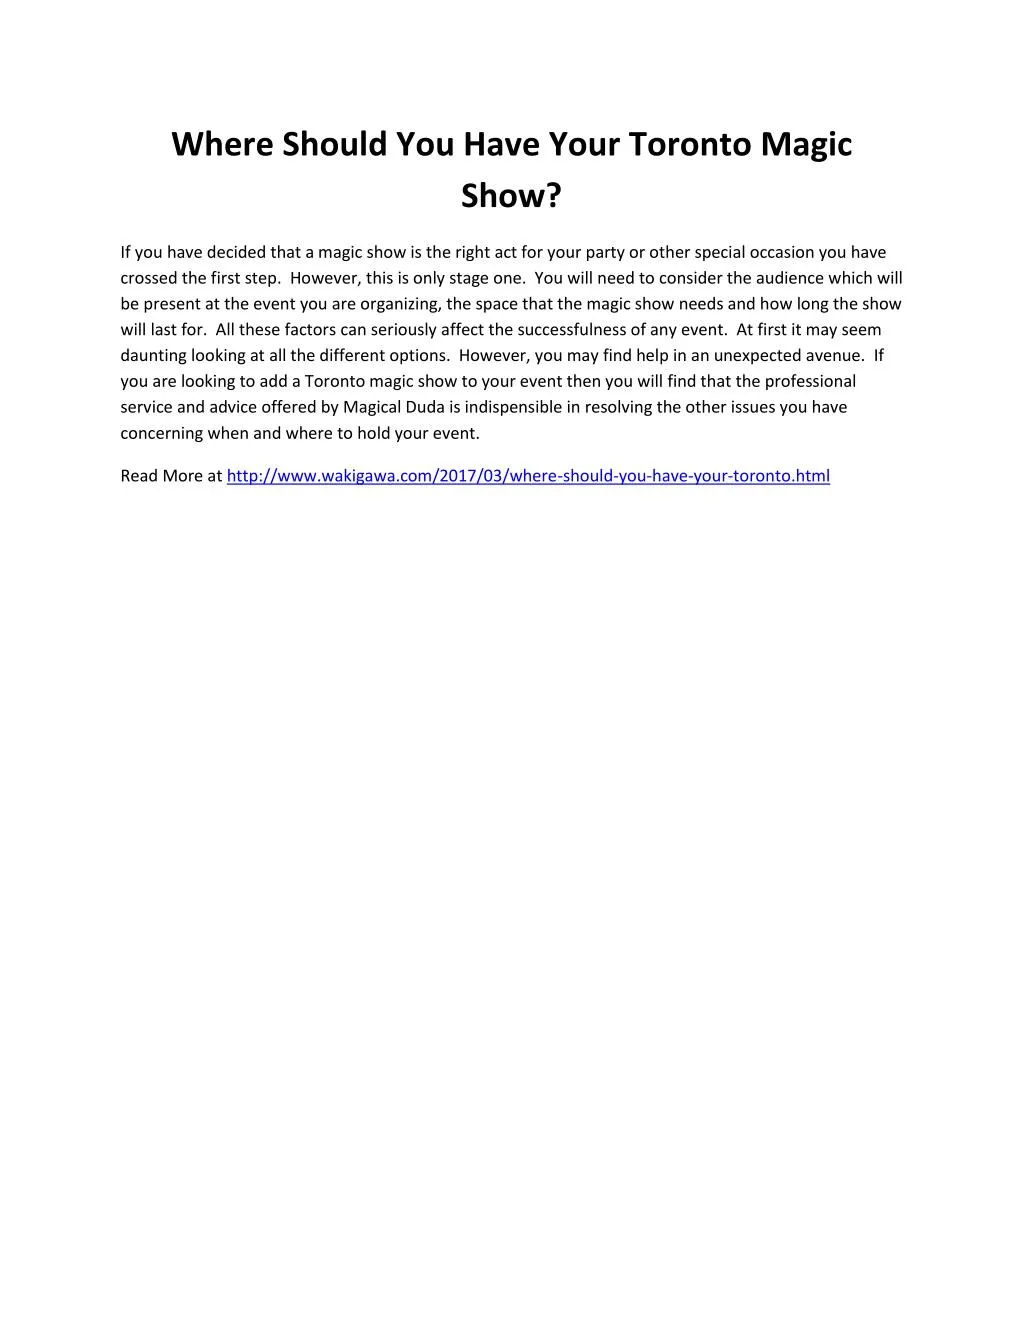 where should you have your toronto magic show